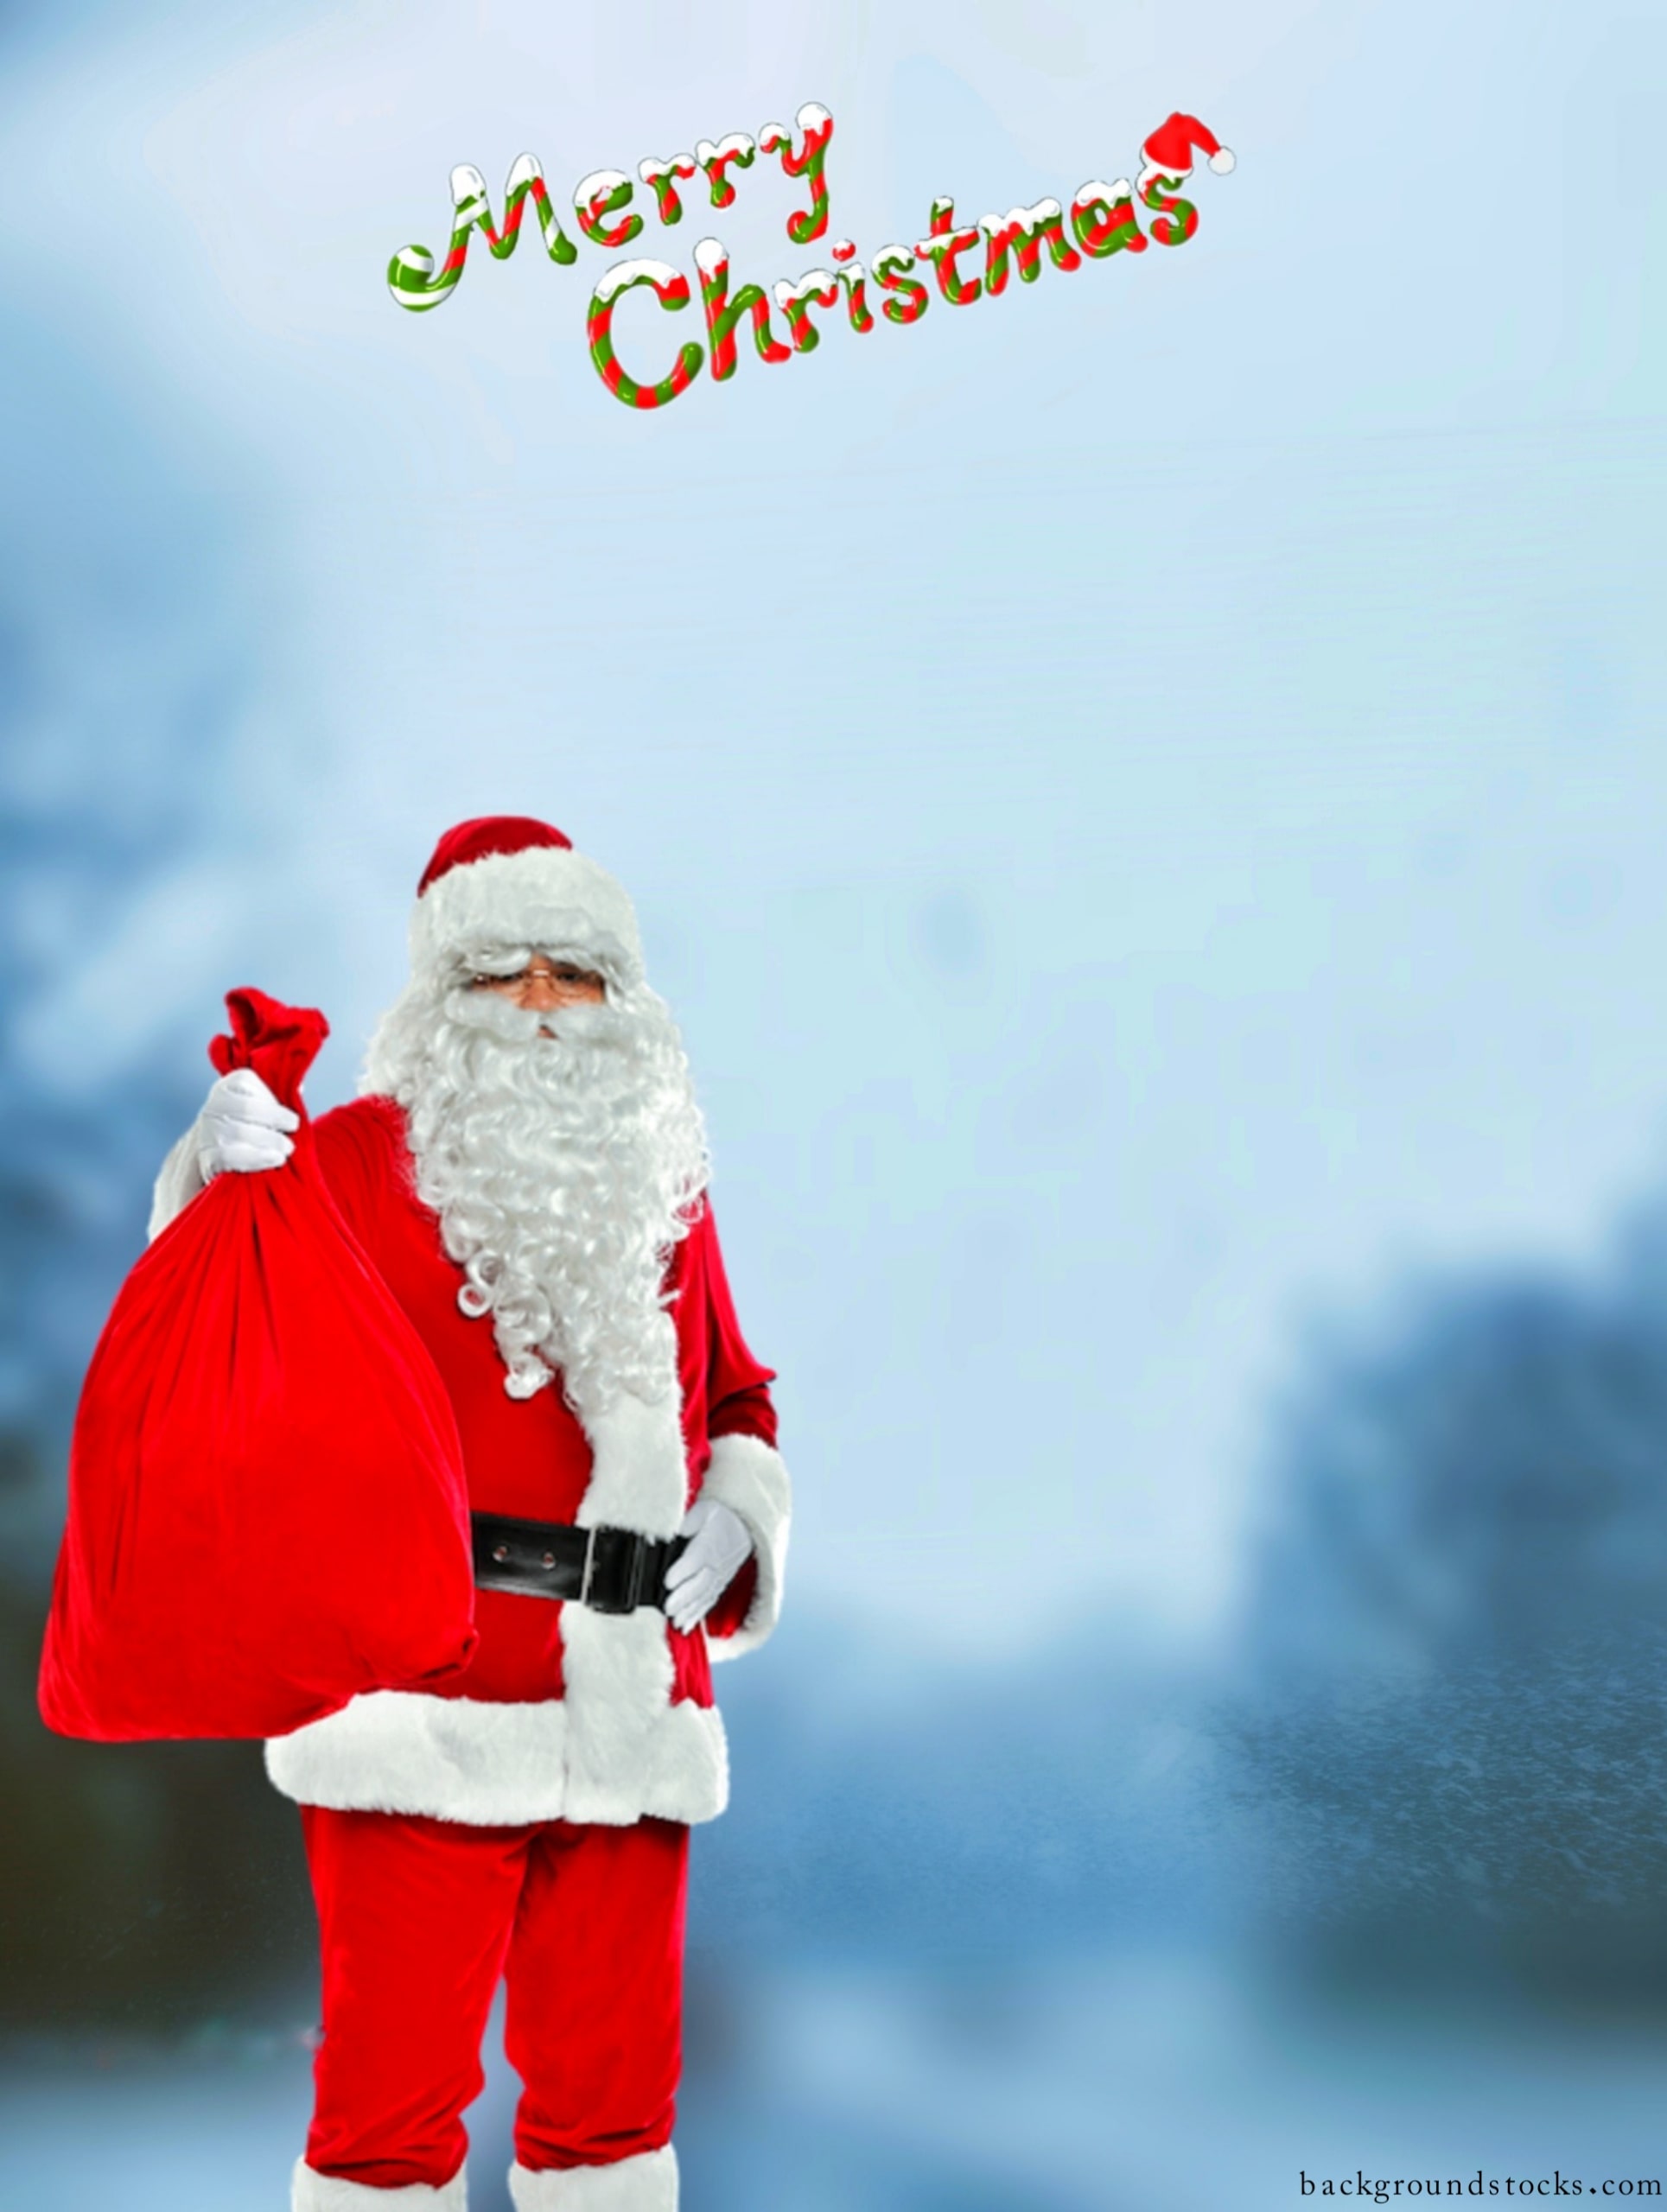 Christmas Background Image HD Download New